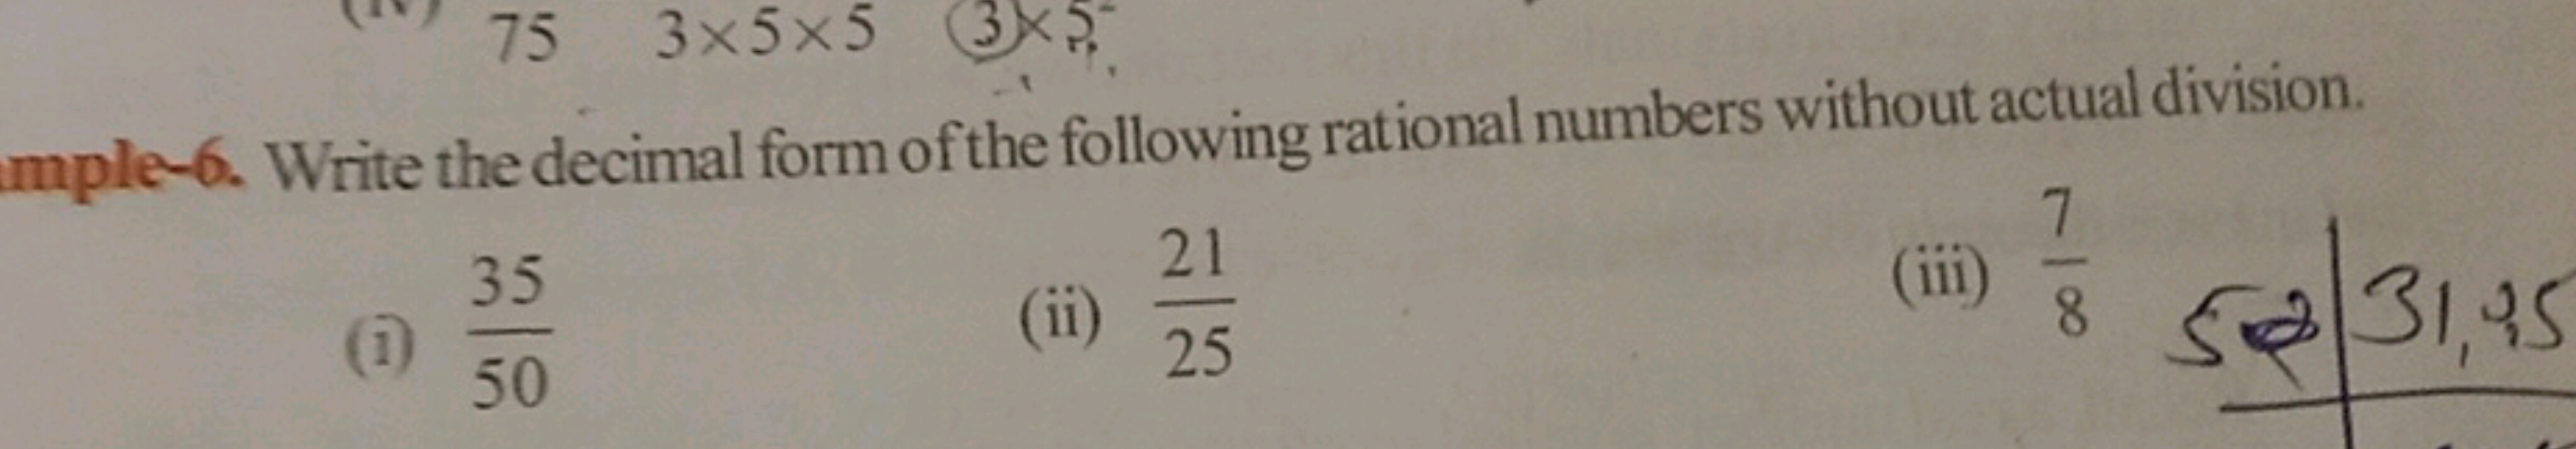 6. Write the decimal form of the following rational numbers without ac